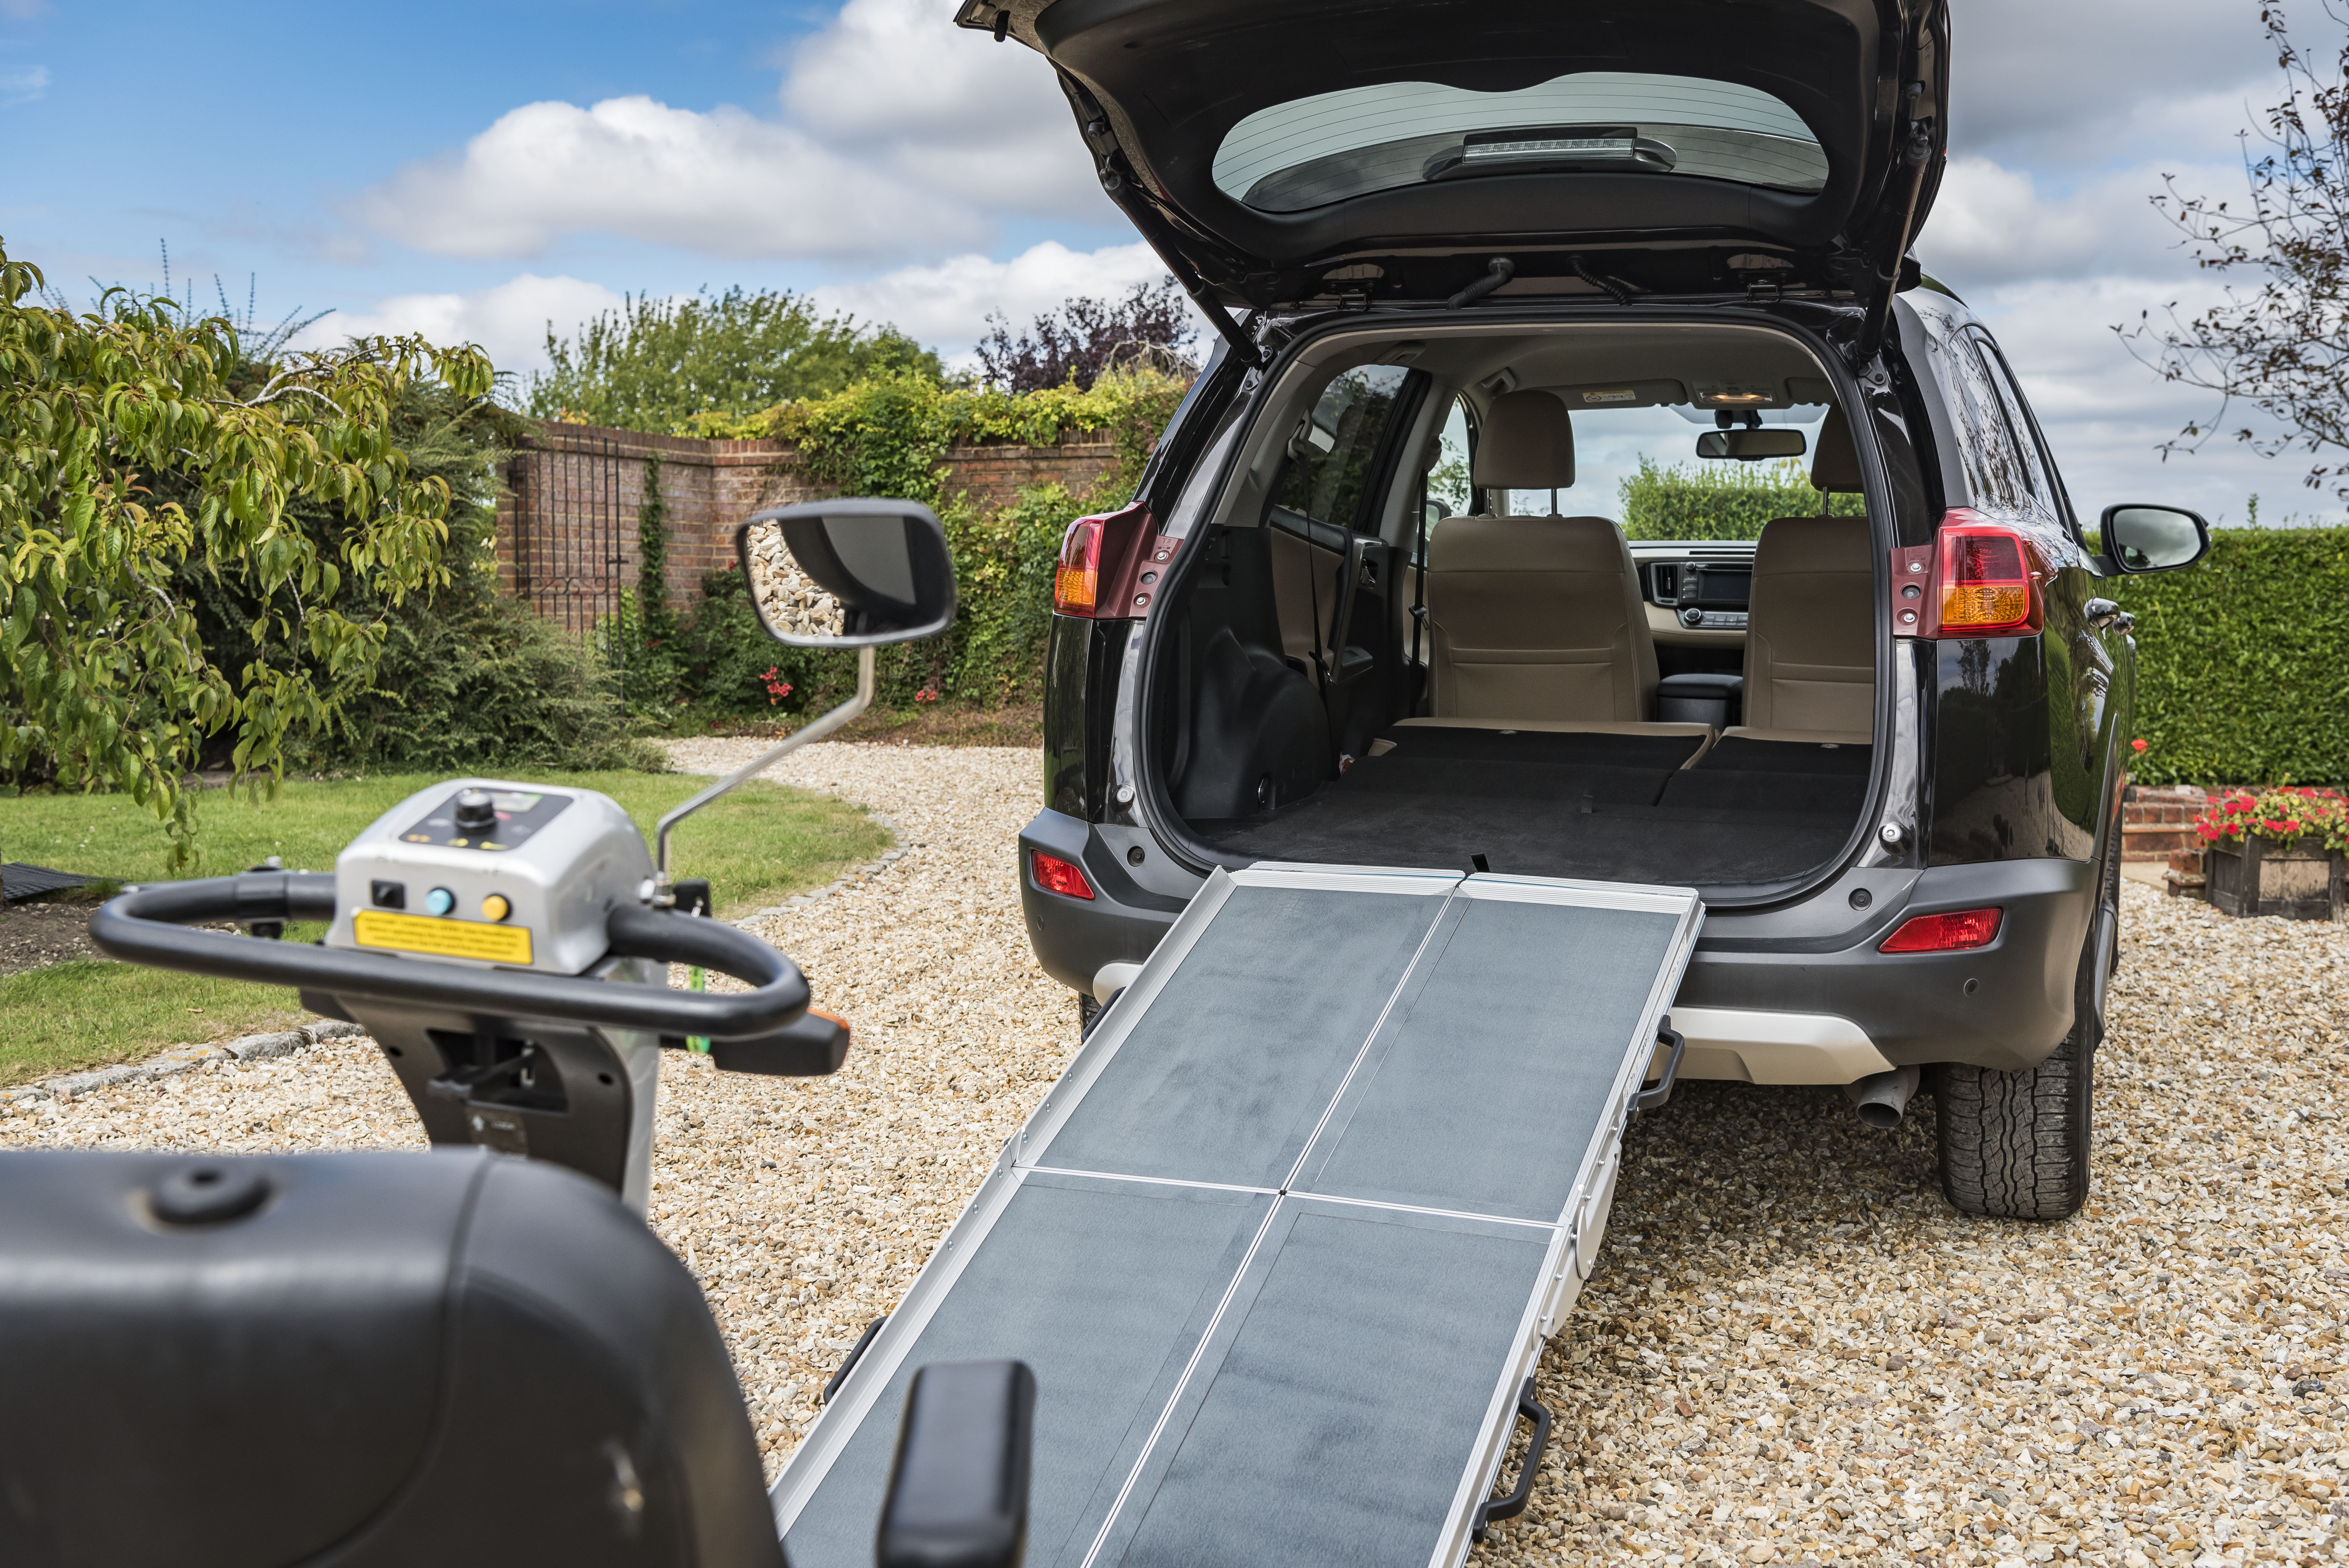 A foldaway ramp leading a mobility scooter up into the back of car